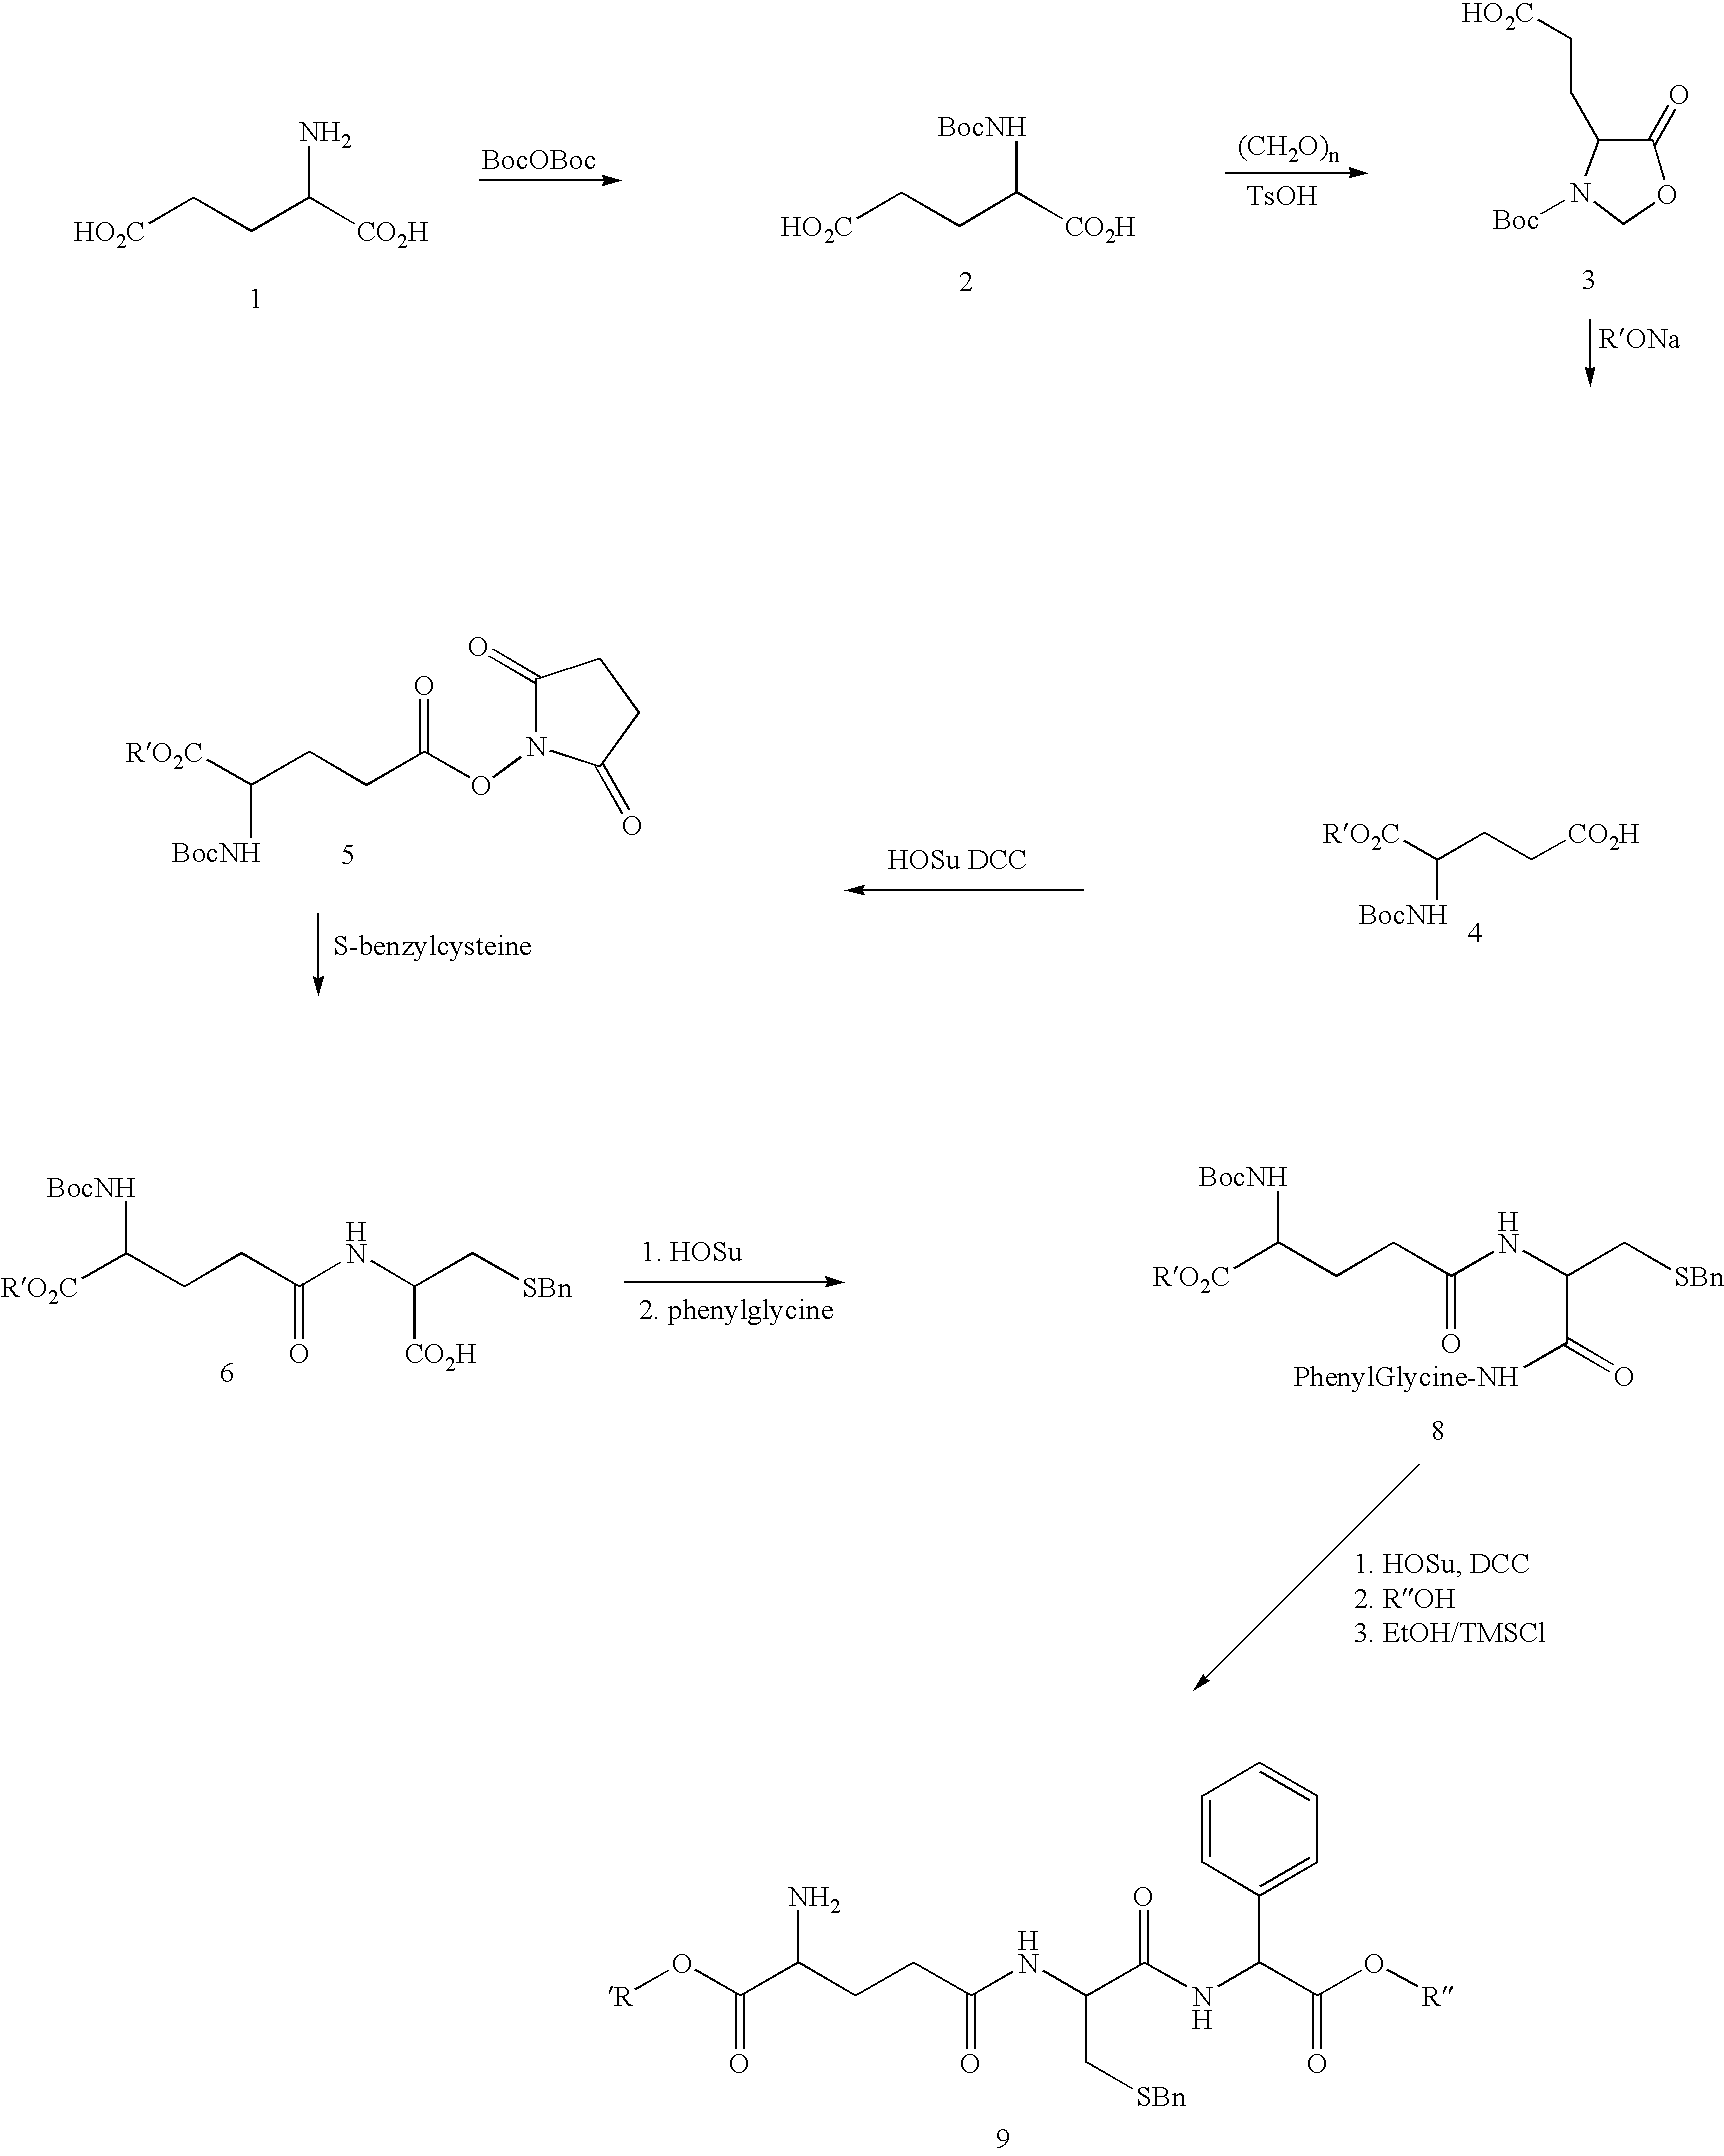 Therapeutic compositions containing glutathione analogs